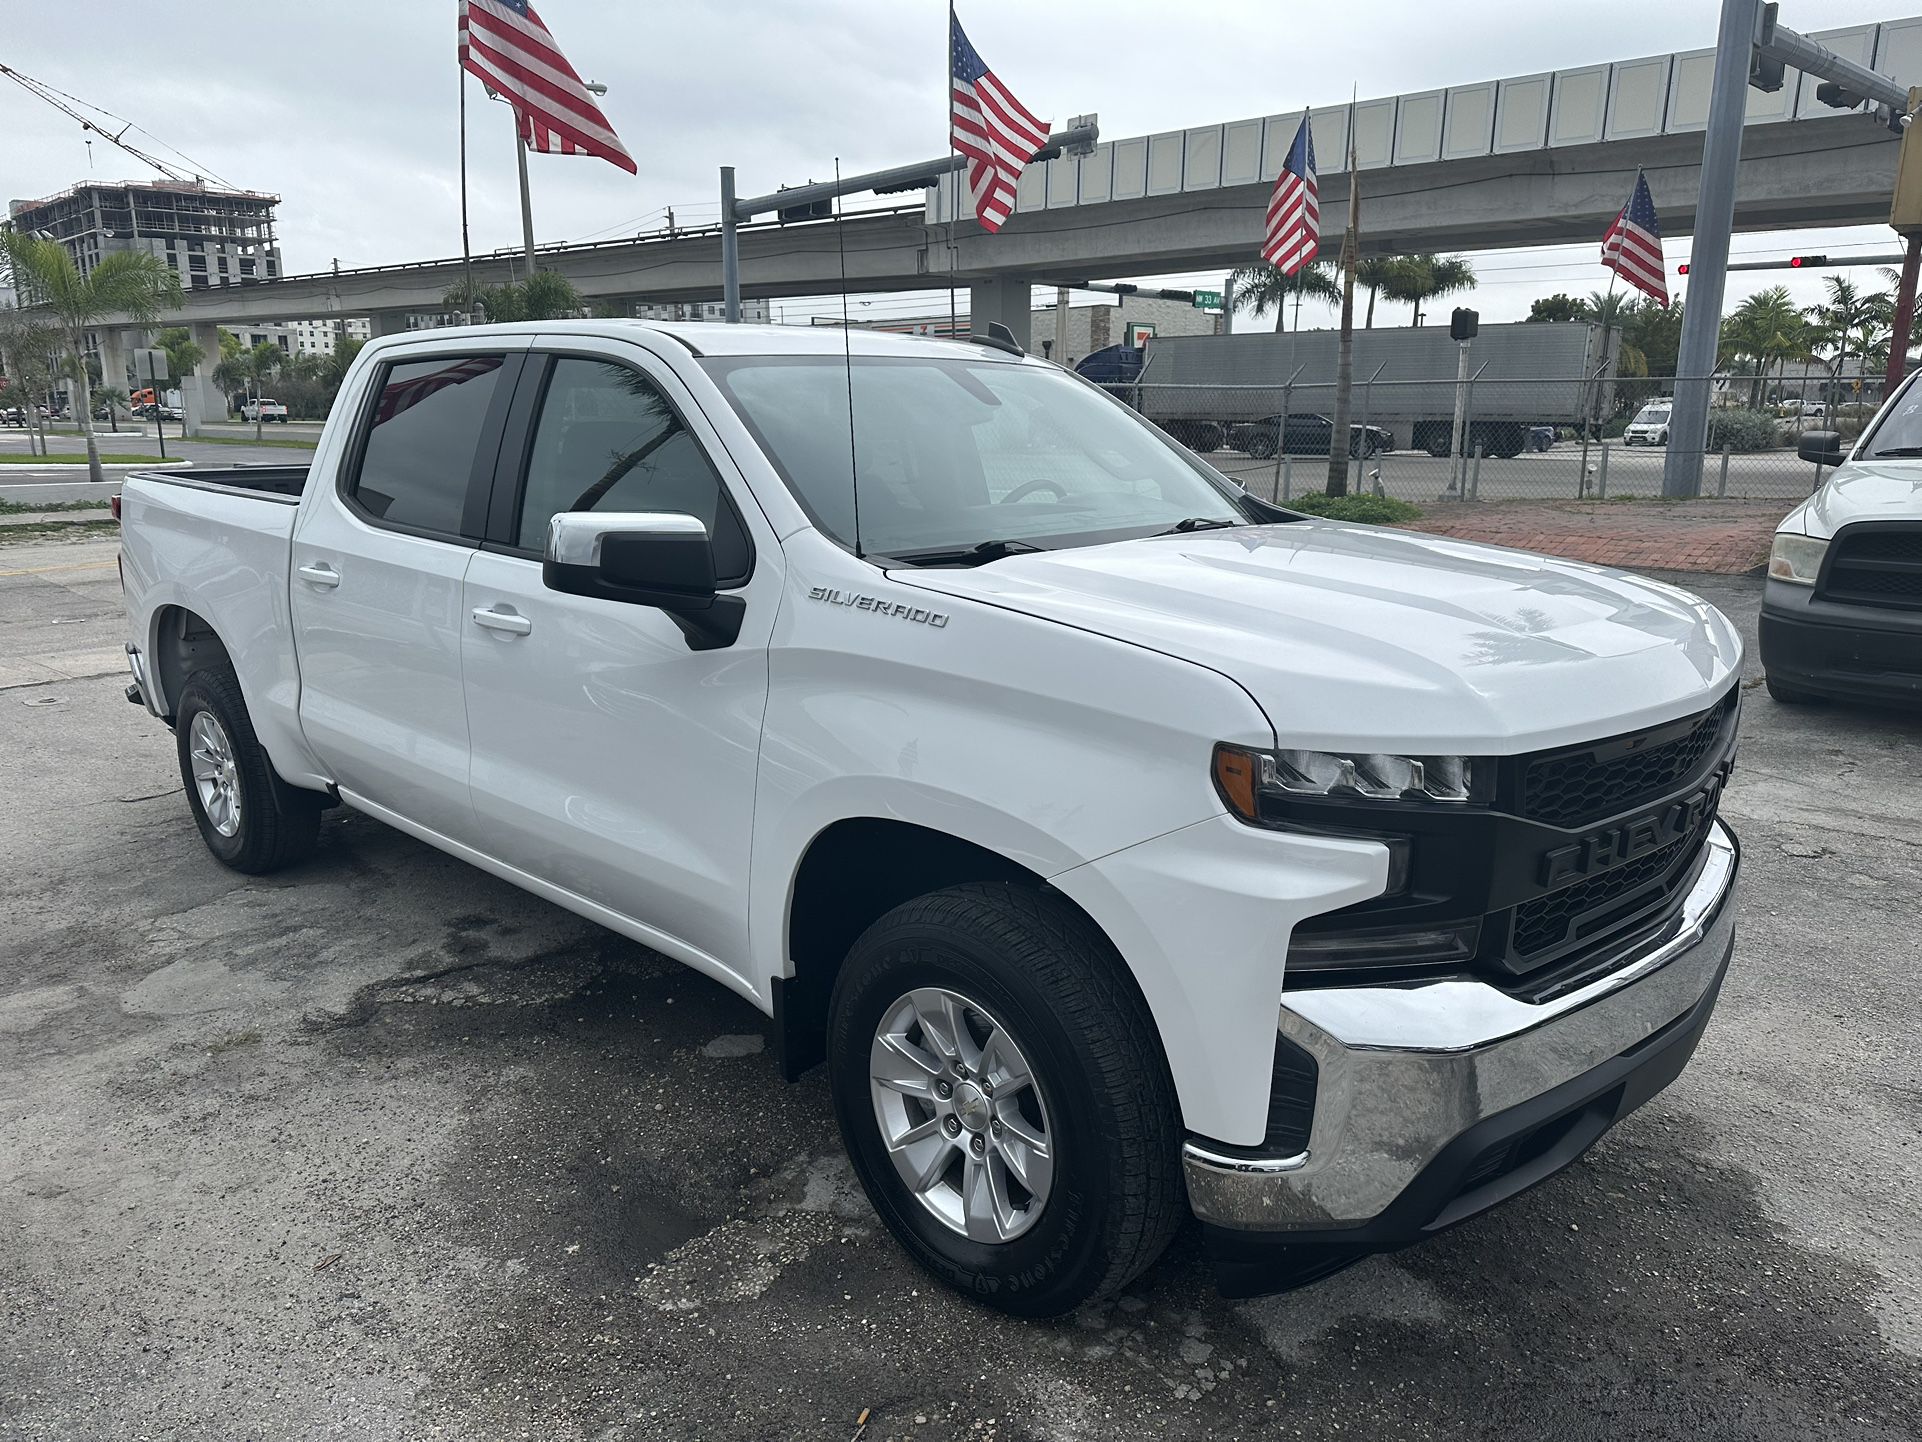 used 2020 chevy silverado - front view 2